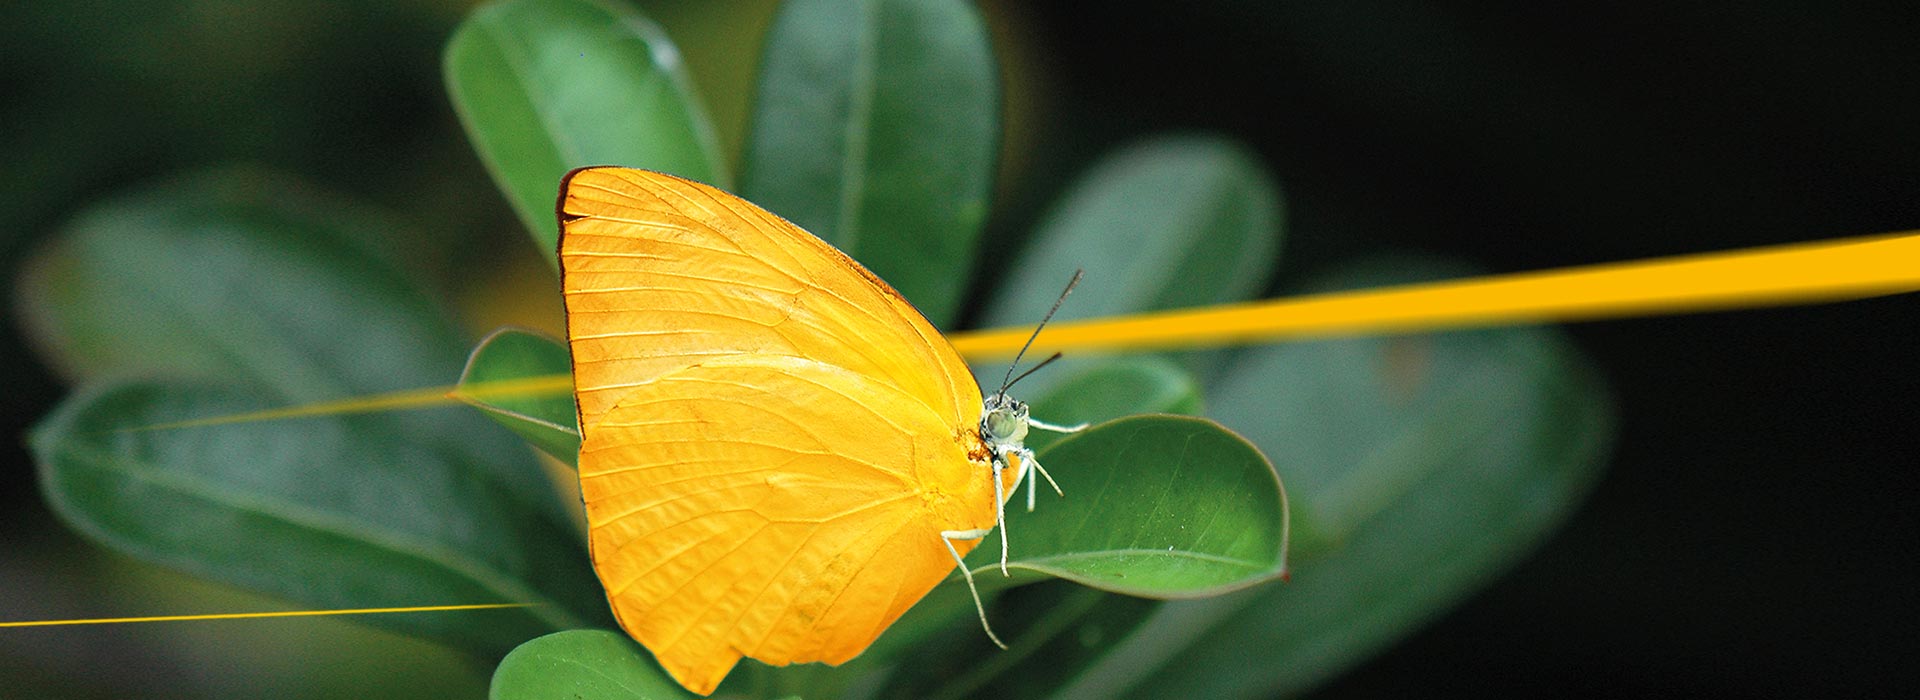 Butterfly sits on a plant | LGI Green care